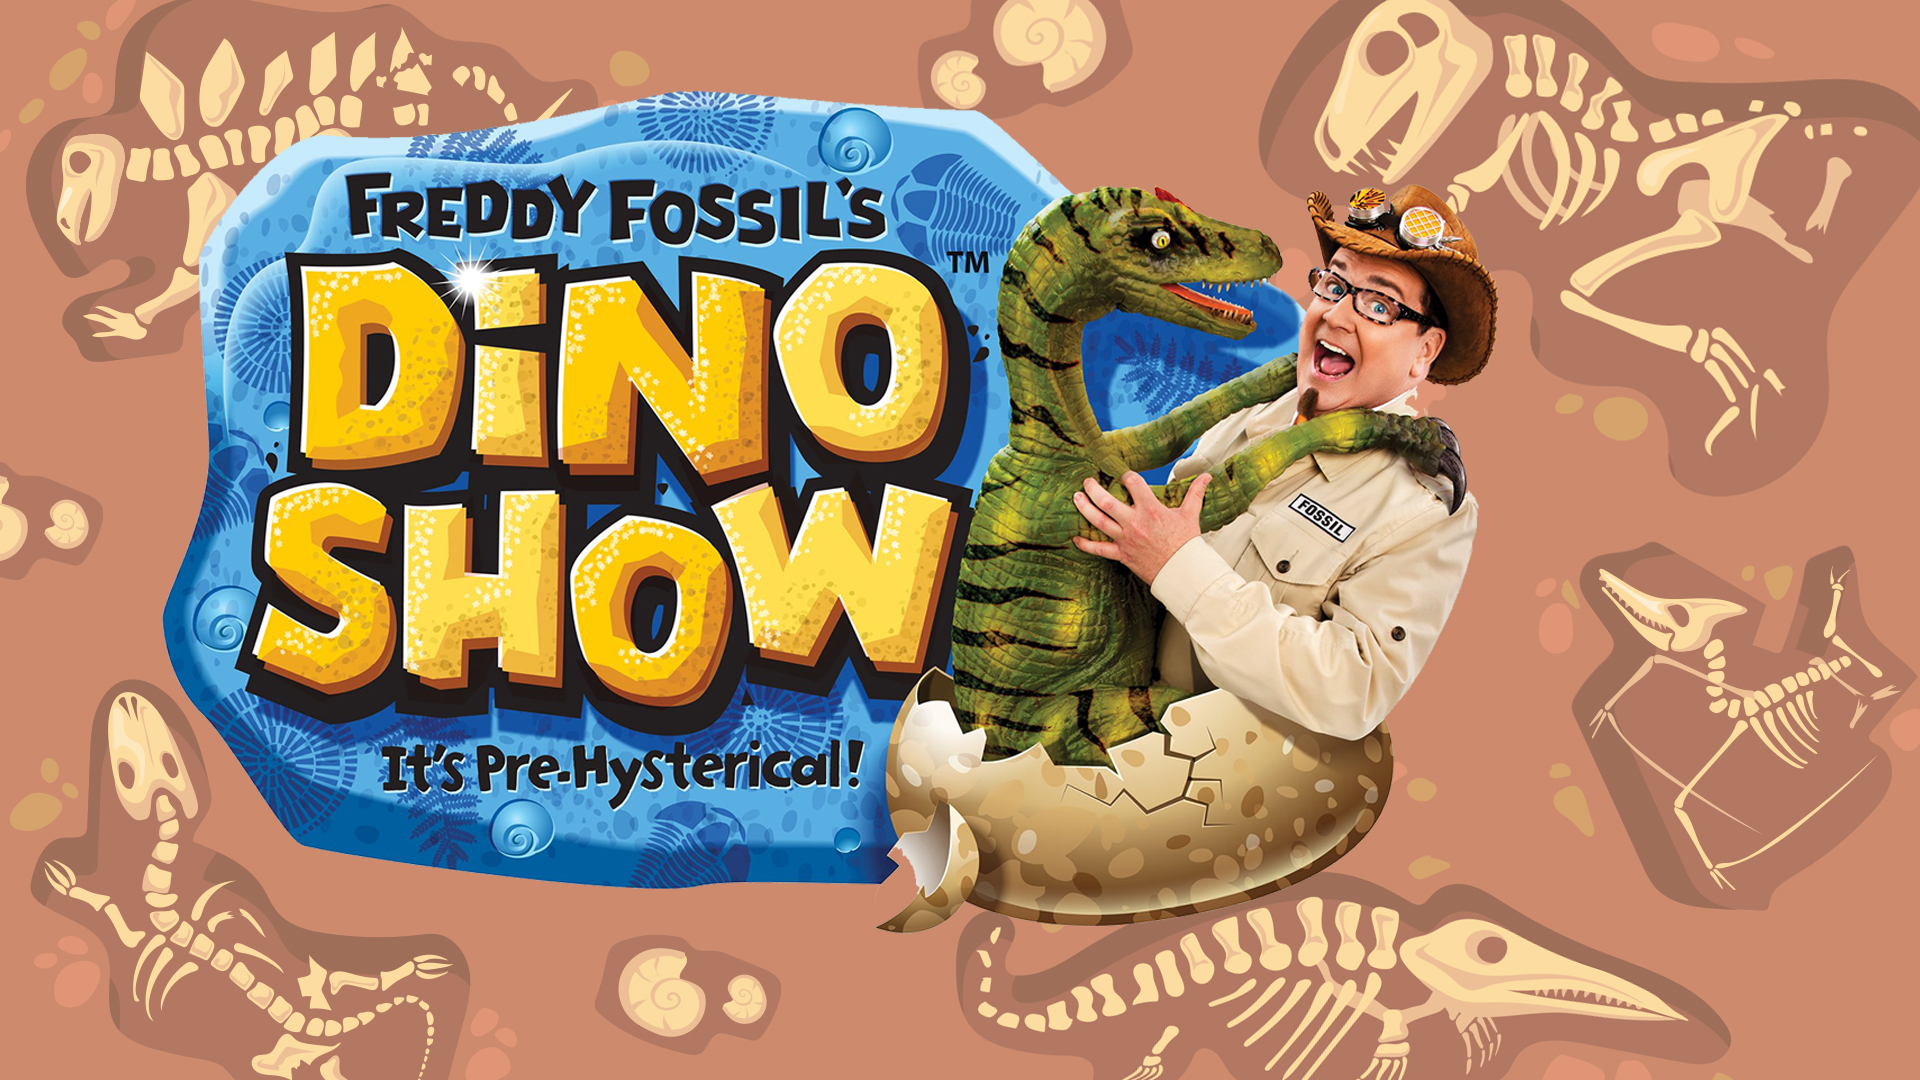 Image shows "Freddy Fossil's Dino Show" logo against a background of dinosaur fossils in dirt.